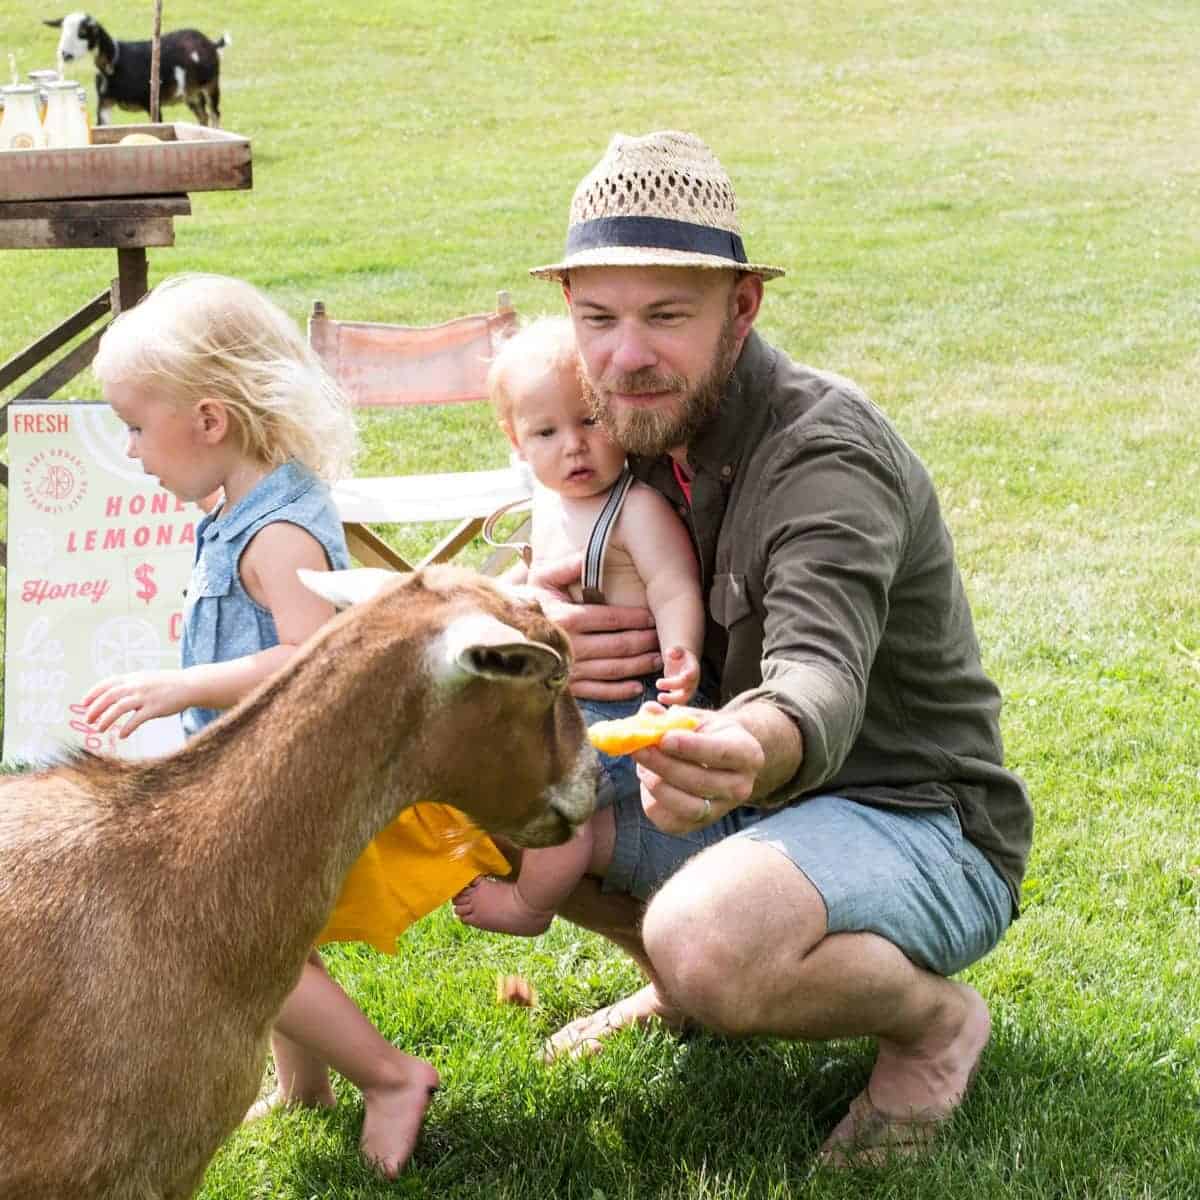 Dad holding young son and feeding a goat a piece of lemon